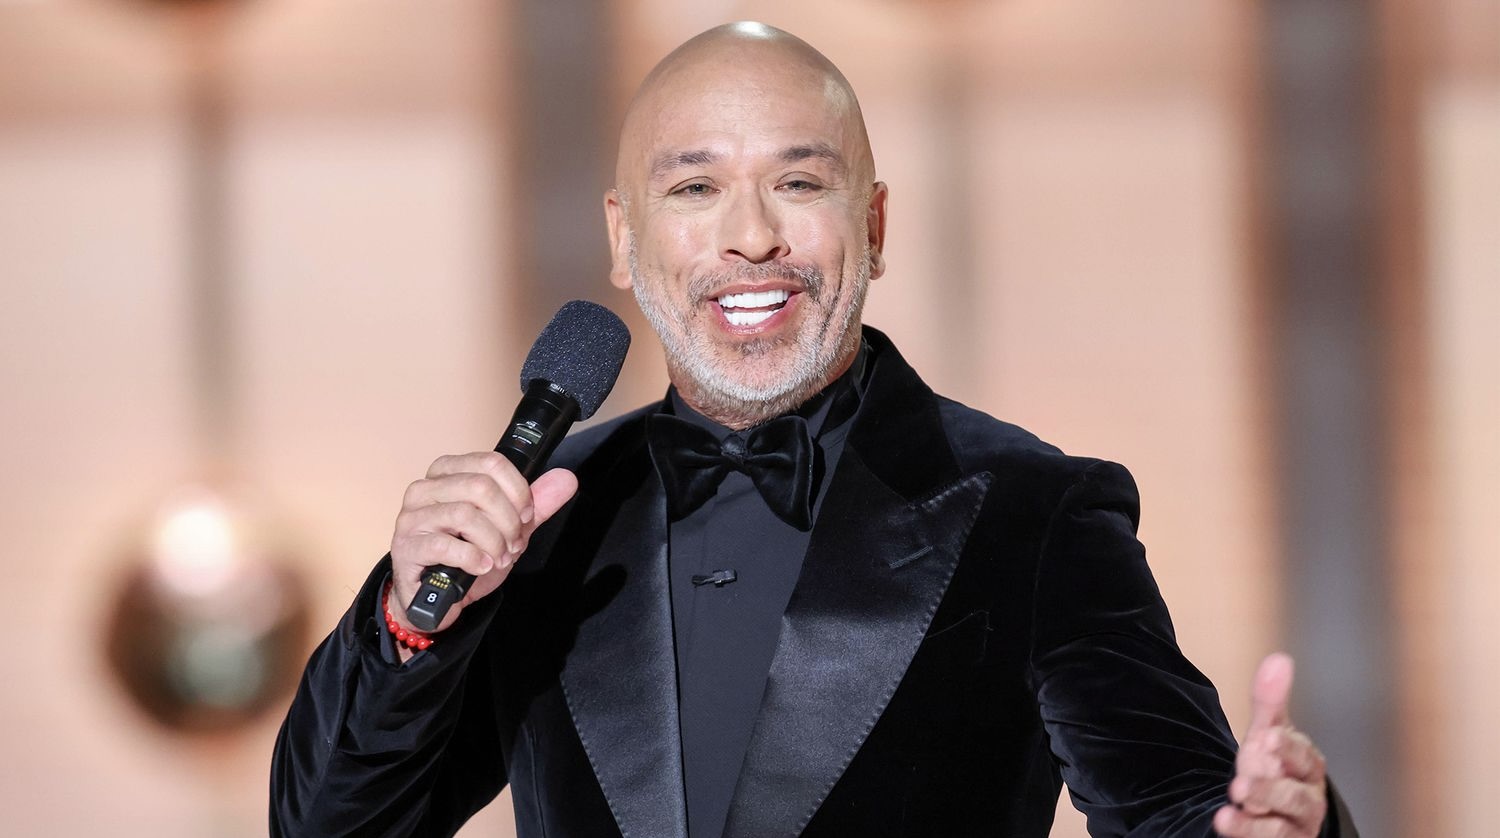 Jo Koy Seemed To Call All The Celebrities Who Didn’t Laugh At His Much-Mocked Golden Globes Monologue ‘Marshmallows’